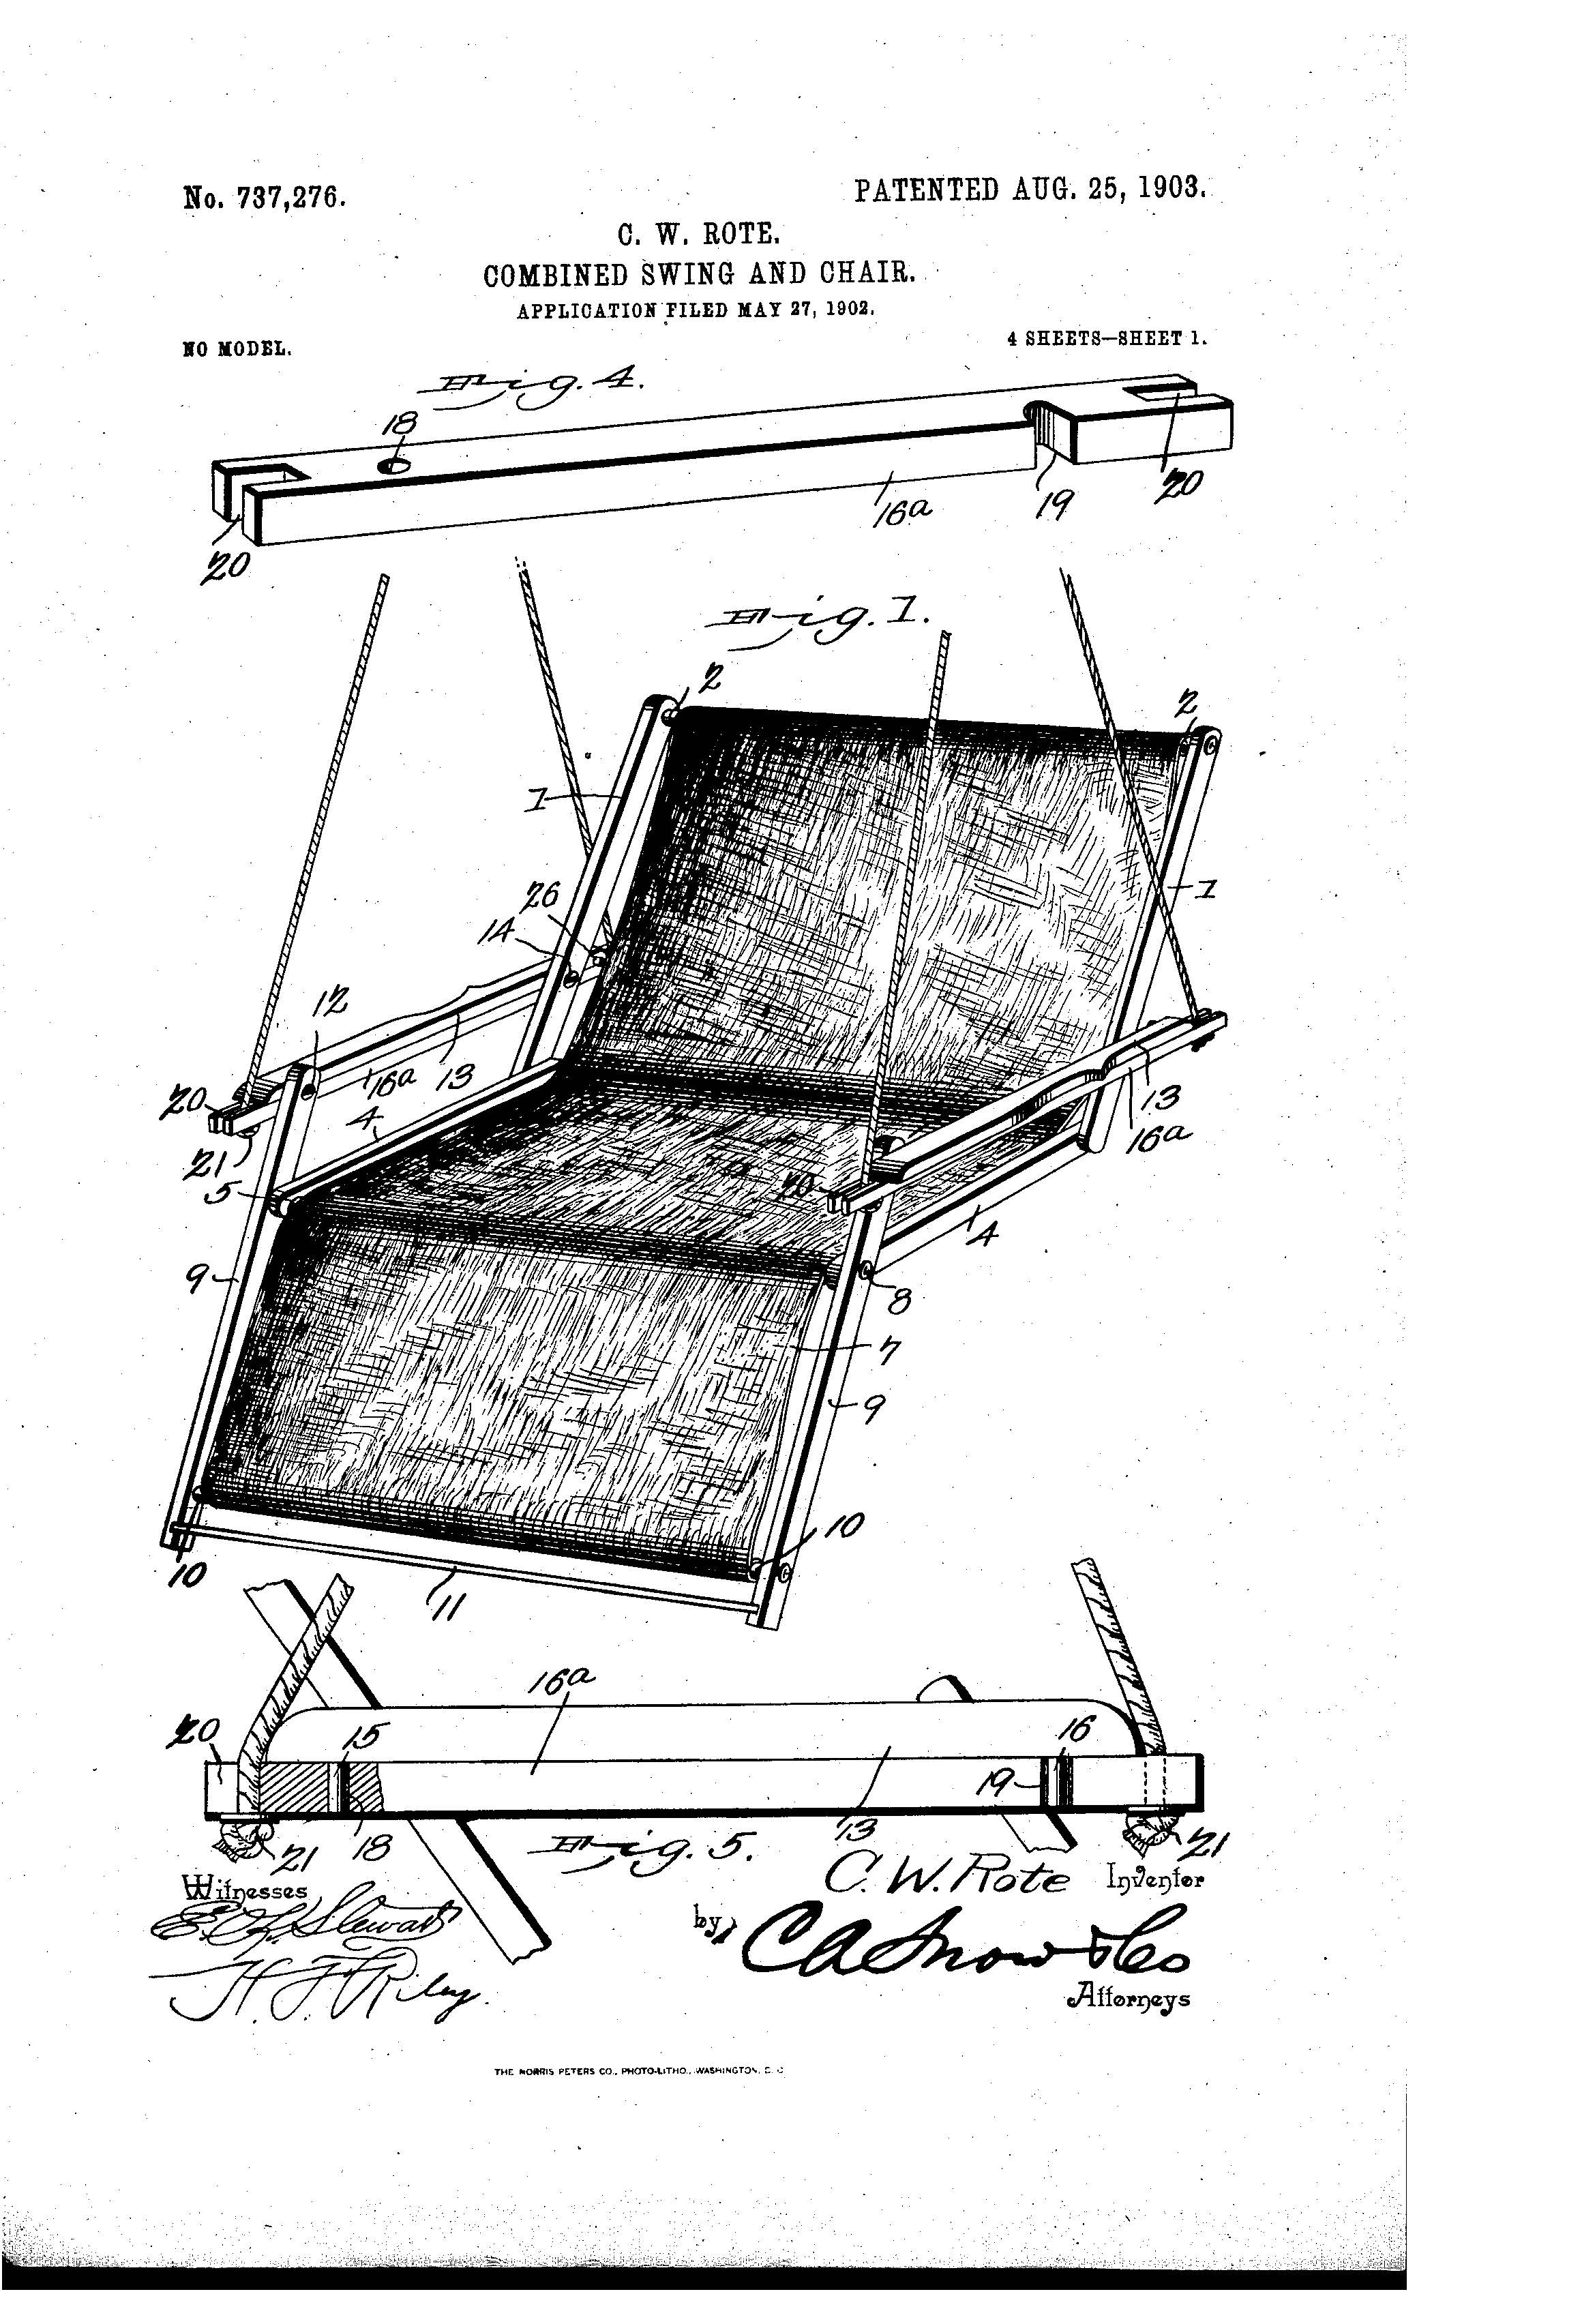 Combined Swing and Chair Patent